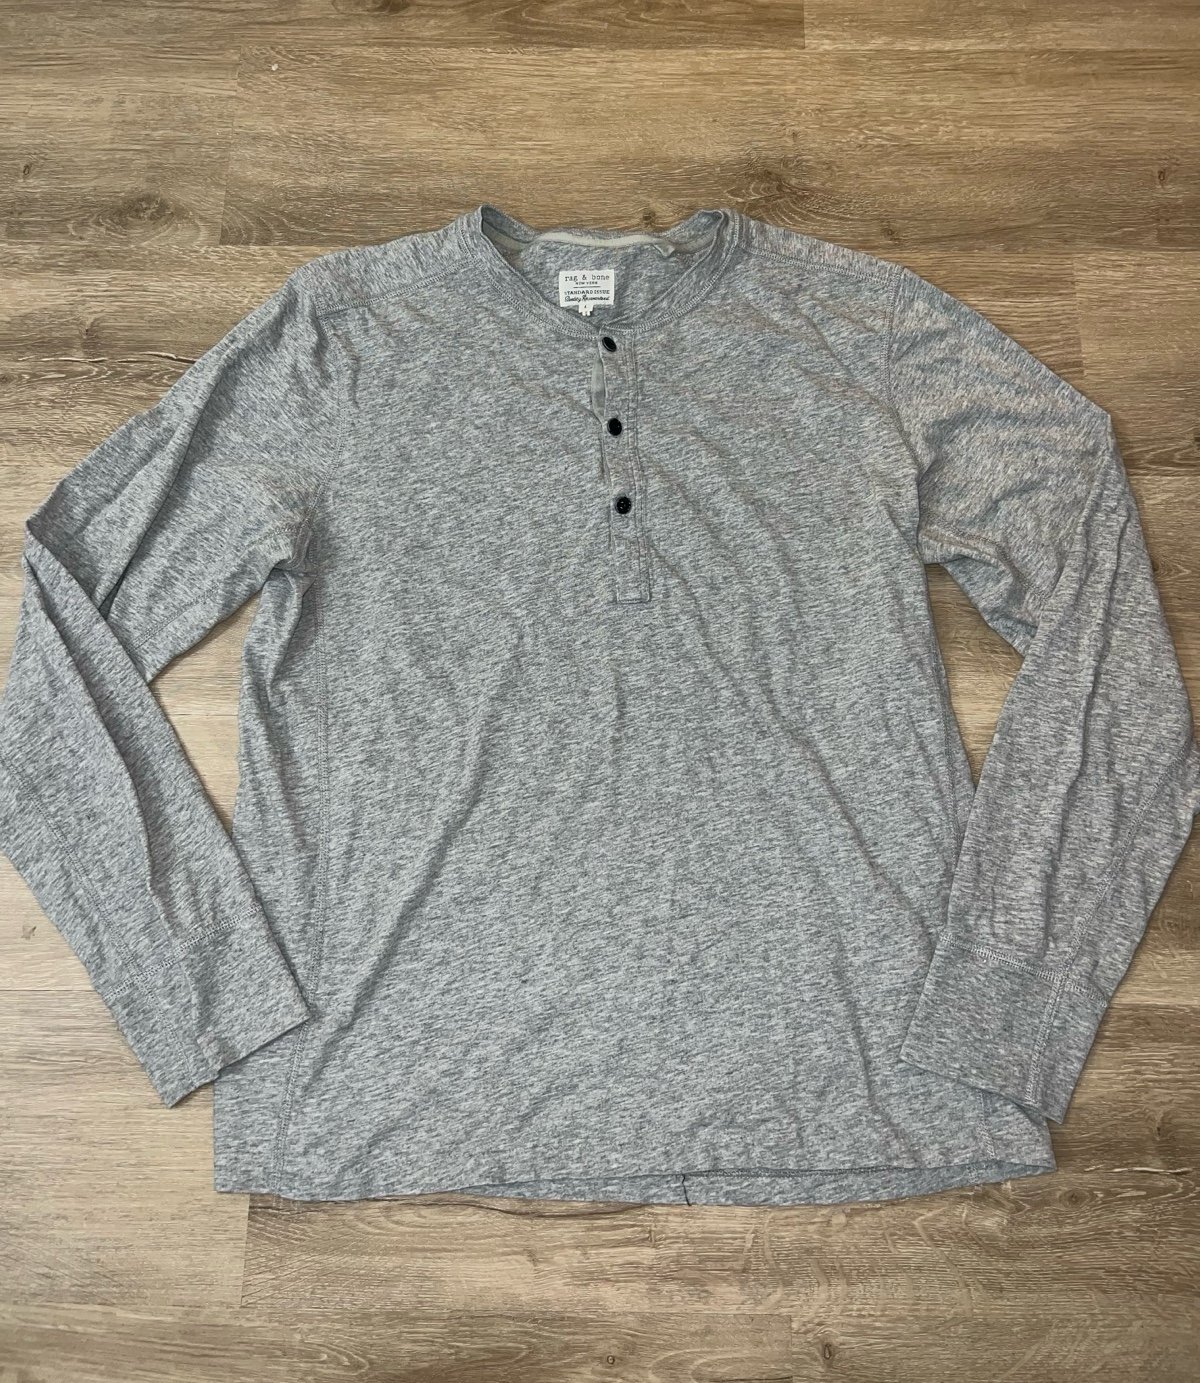 Men’s Rag And Bone Henley Long Sleeve Shirt Gray Pullover 1/4 Button Size Large lewqstT2s